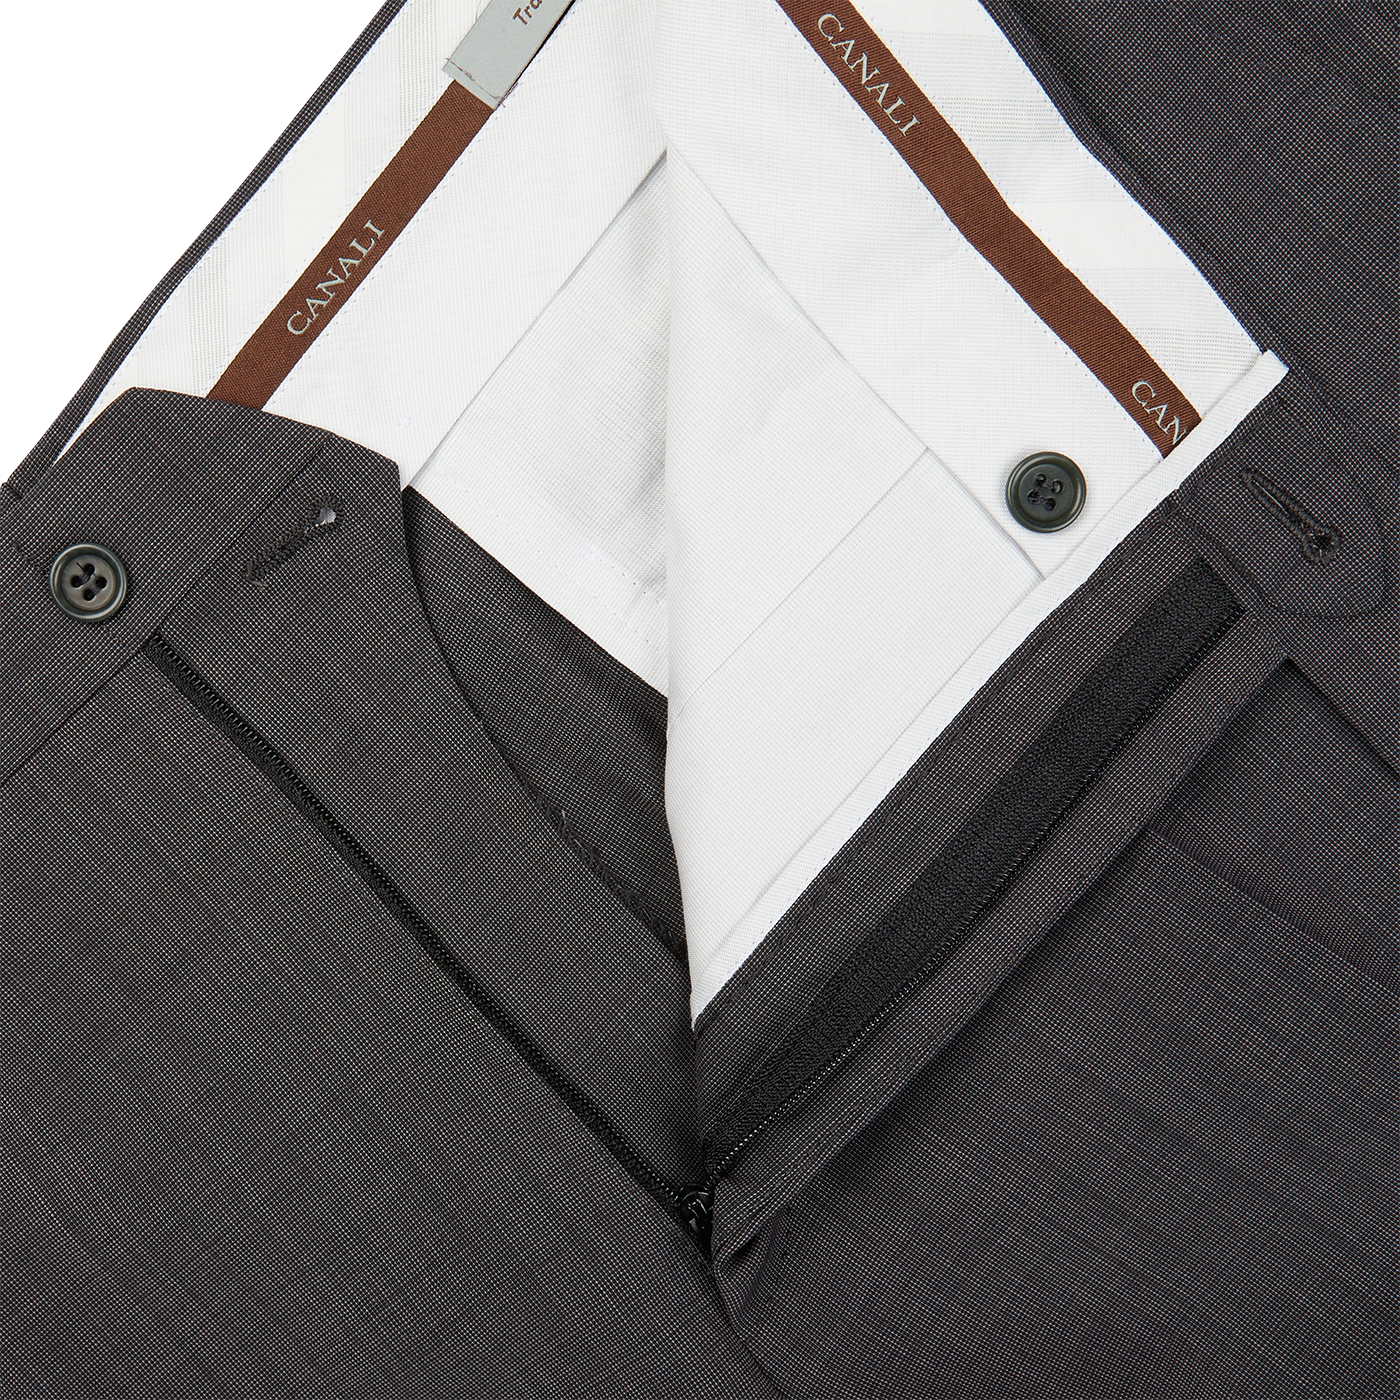 A formal pair of Charcoal Wool End On End Flat Front Trousers from Canali with a side pocket.